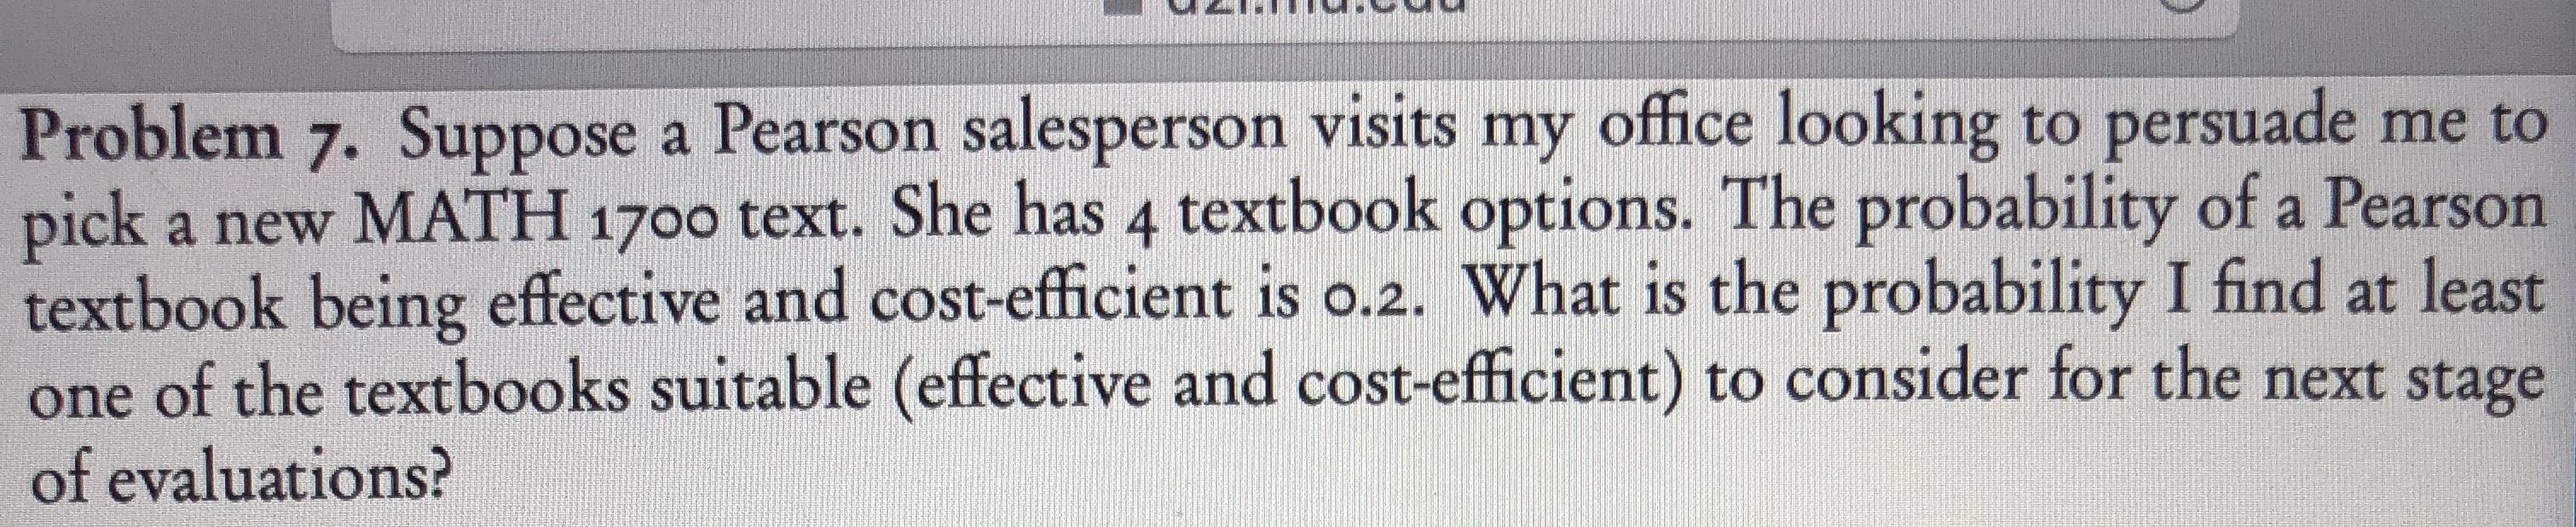 Problem 7. Suppose a Pearson salesperson visits my office looking to persuade me to
pick a new MATH 1700 text. She has 4 textbook options. The probability of a Pearson
textbook being effective and cost-efficient is o.2. What is the probability I find at least
of the textbooks suitable (effective and cost-efficient) to consider for the next stage
of evaluations?
one
